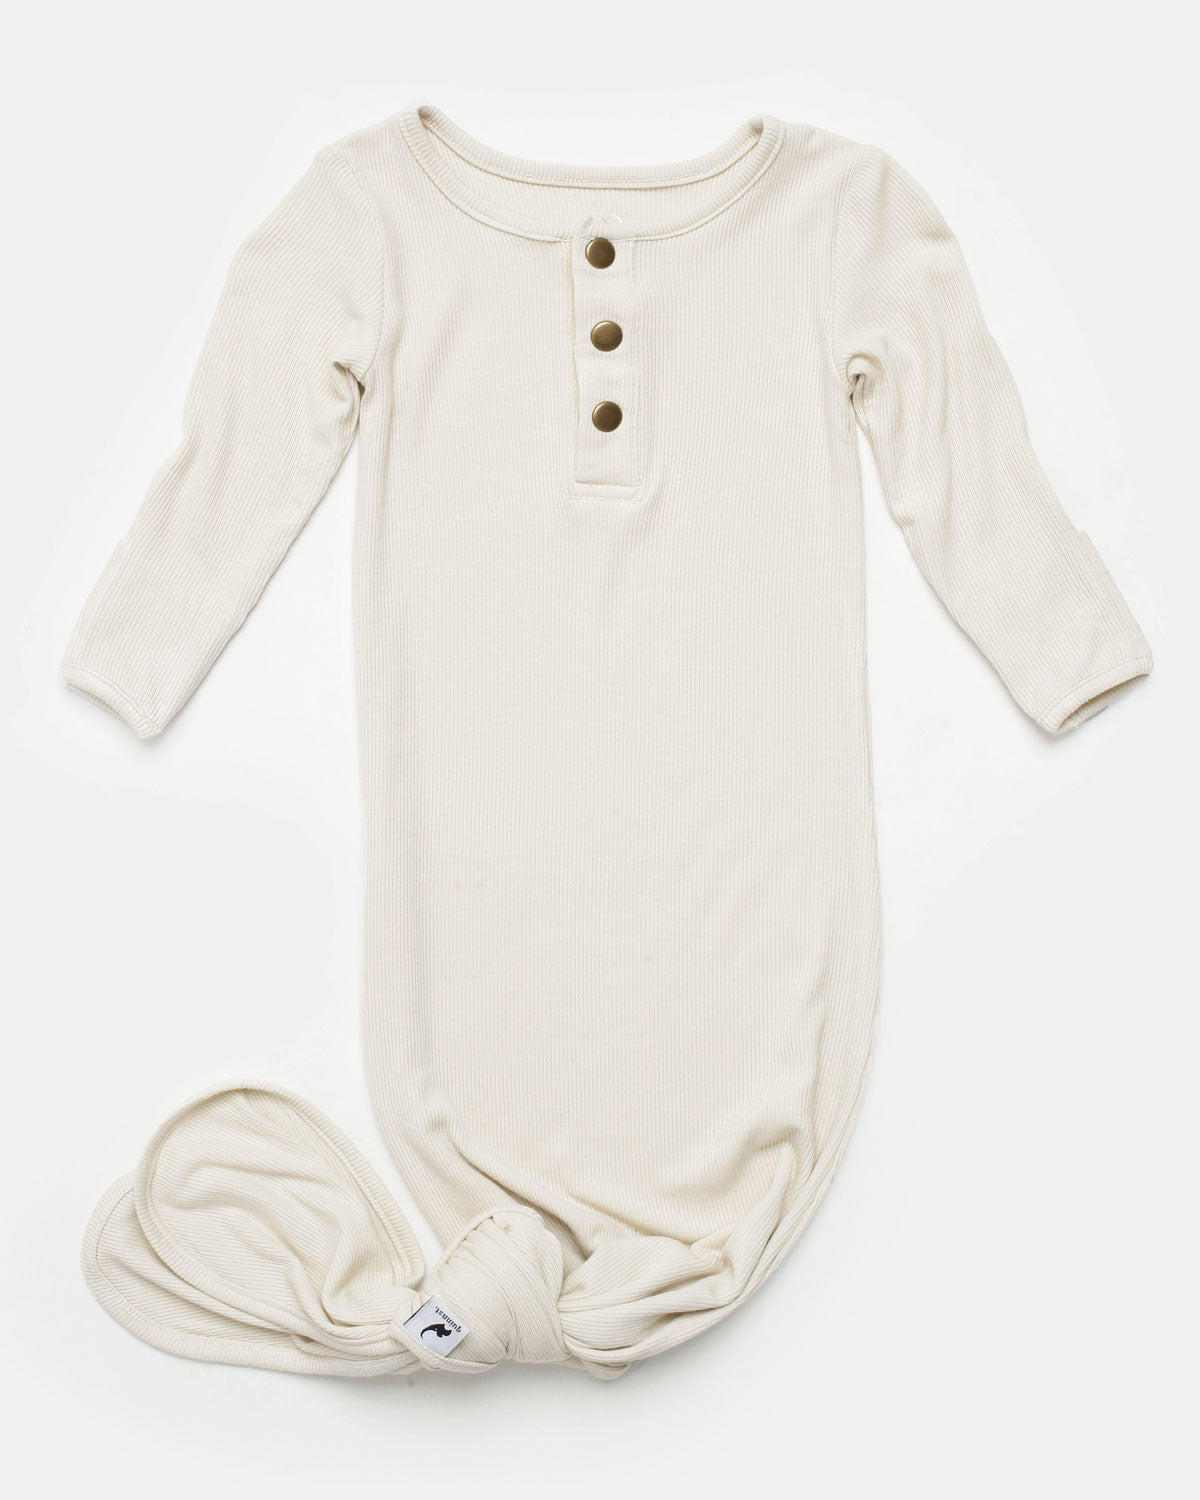 Knotted Sleepers and Swaddles